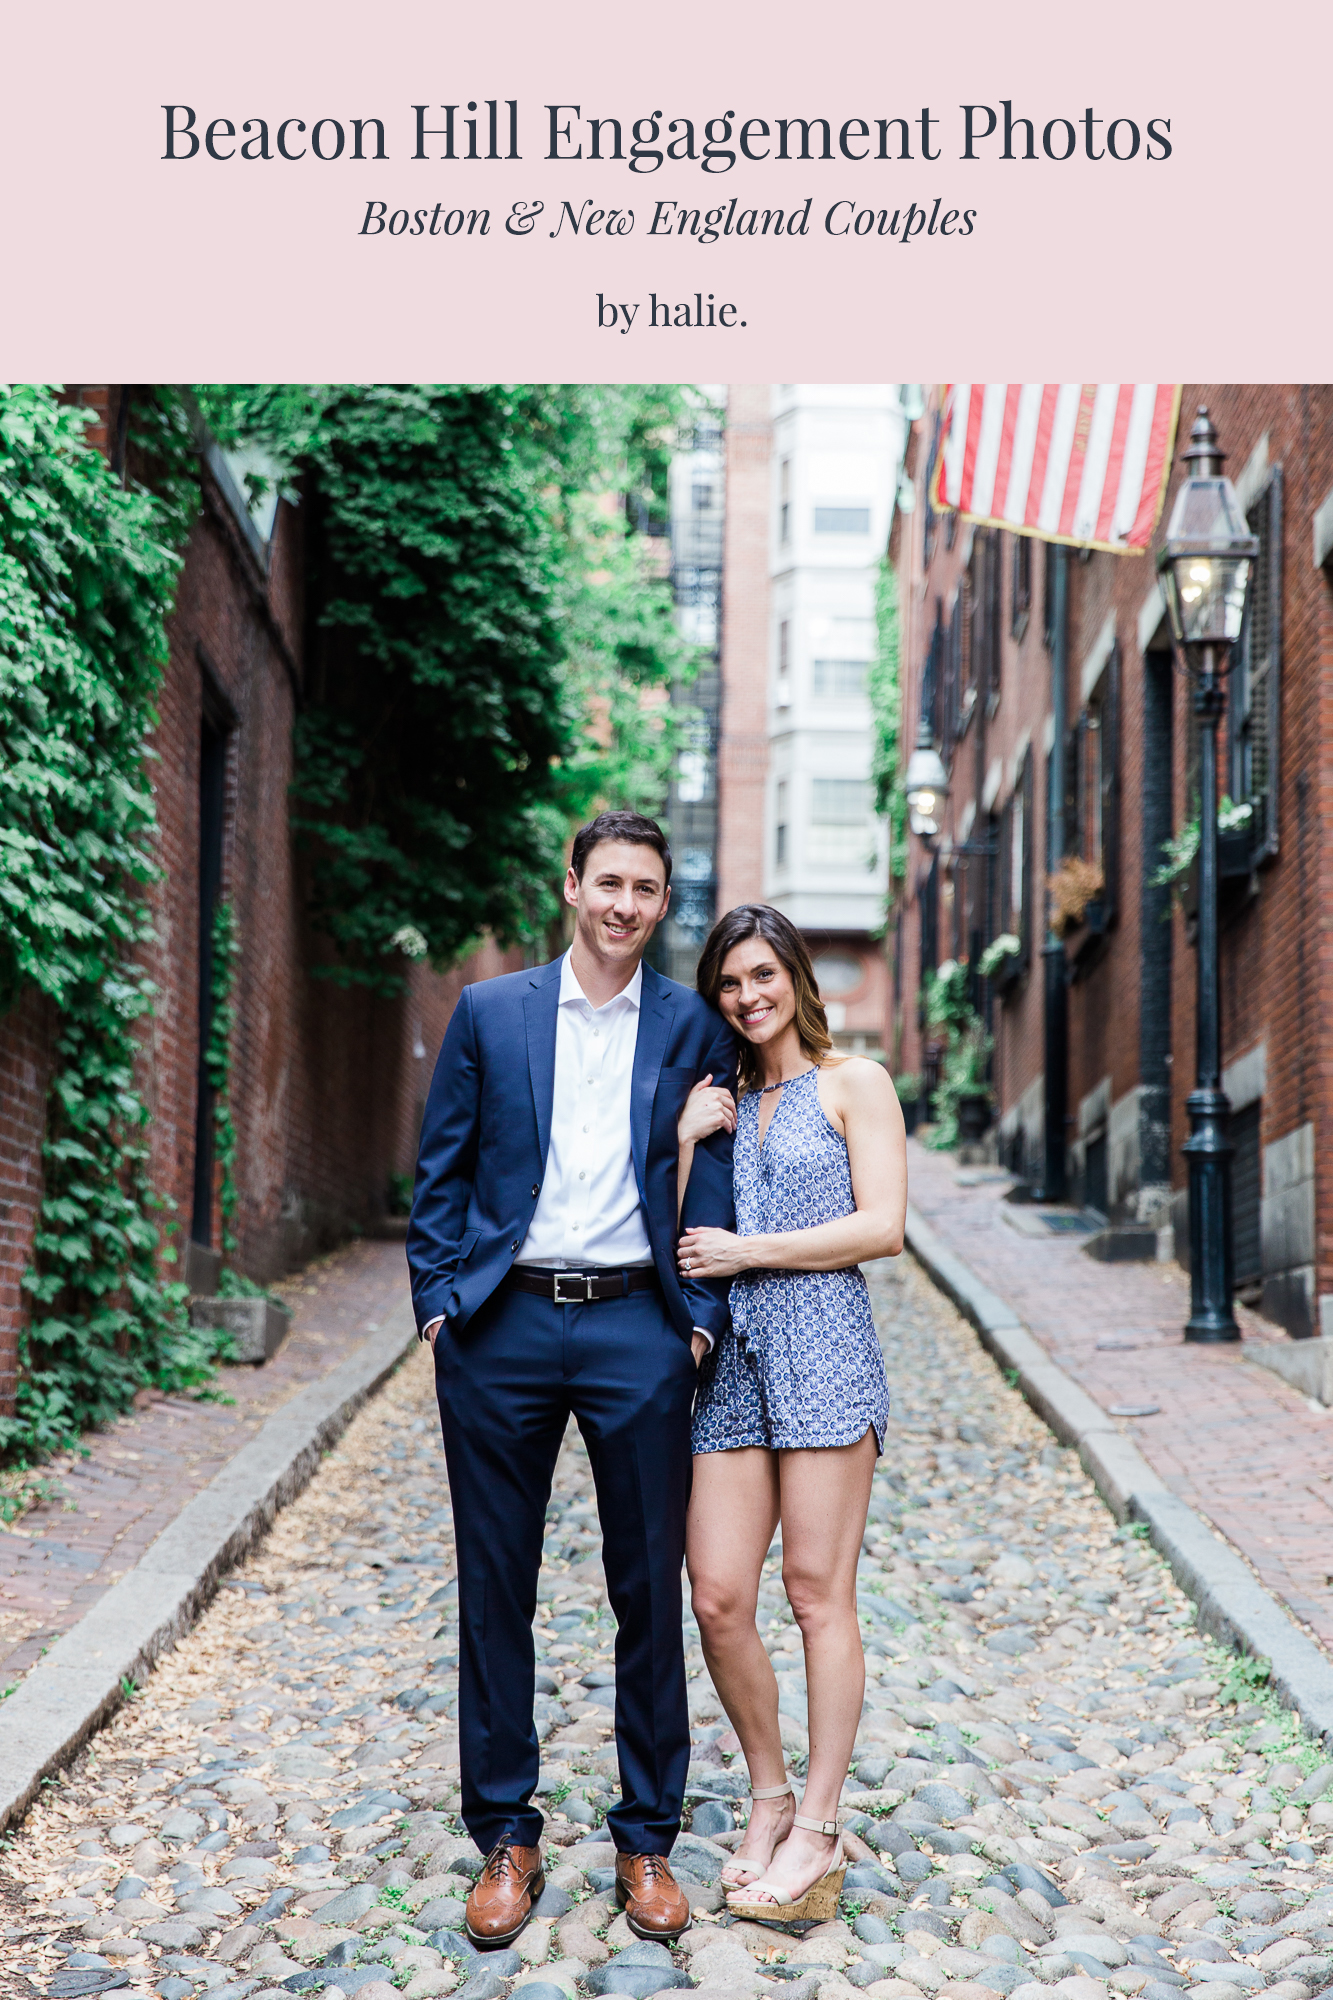 Beacon Hill Boston Engagement Photos, photography by halie.